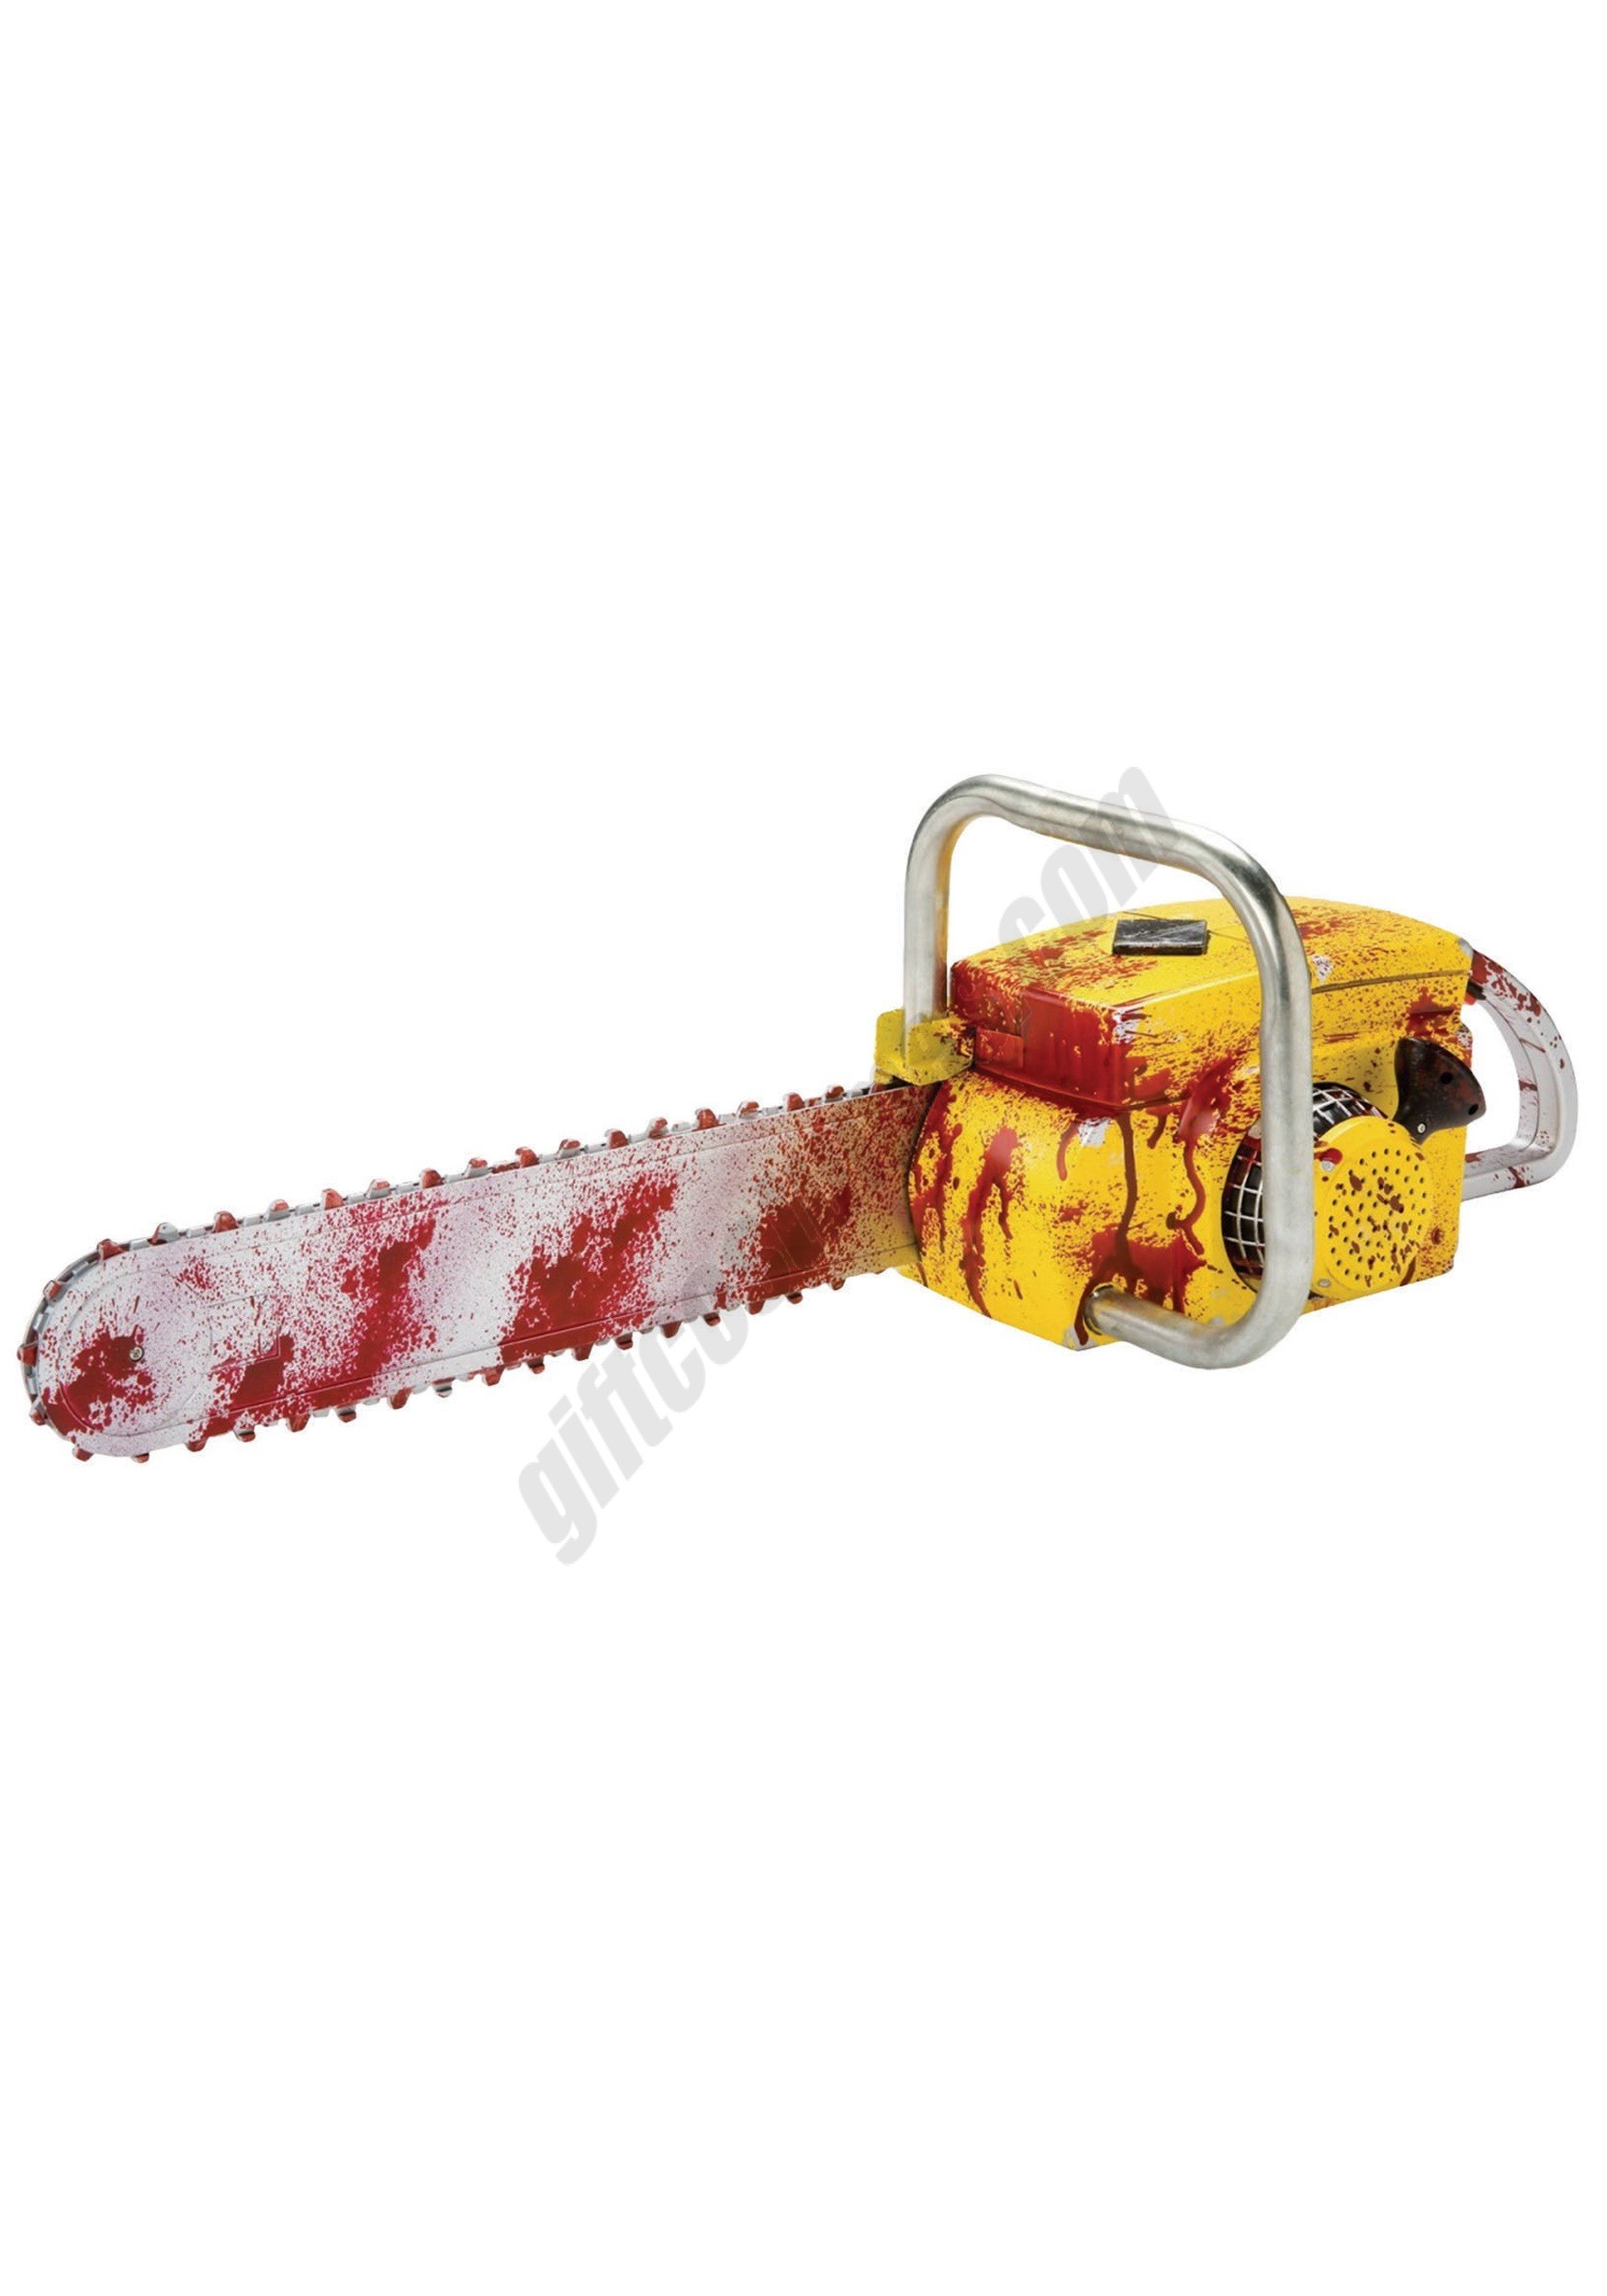 Animated Bloody Chainsaw Promotions - Animated Bloody Chainsaw Promotions